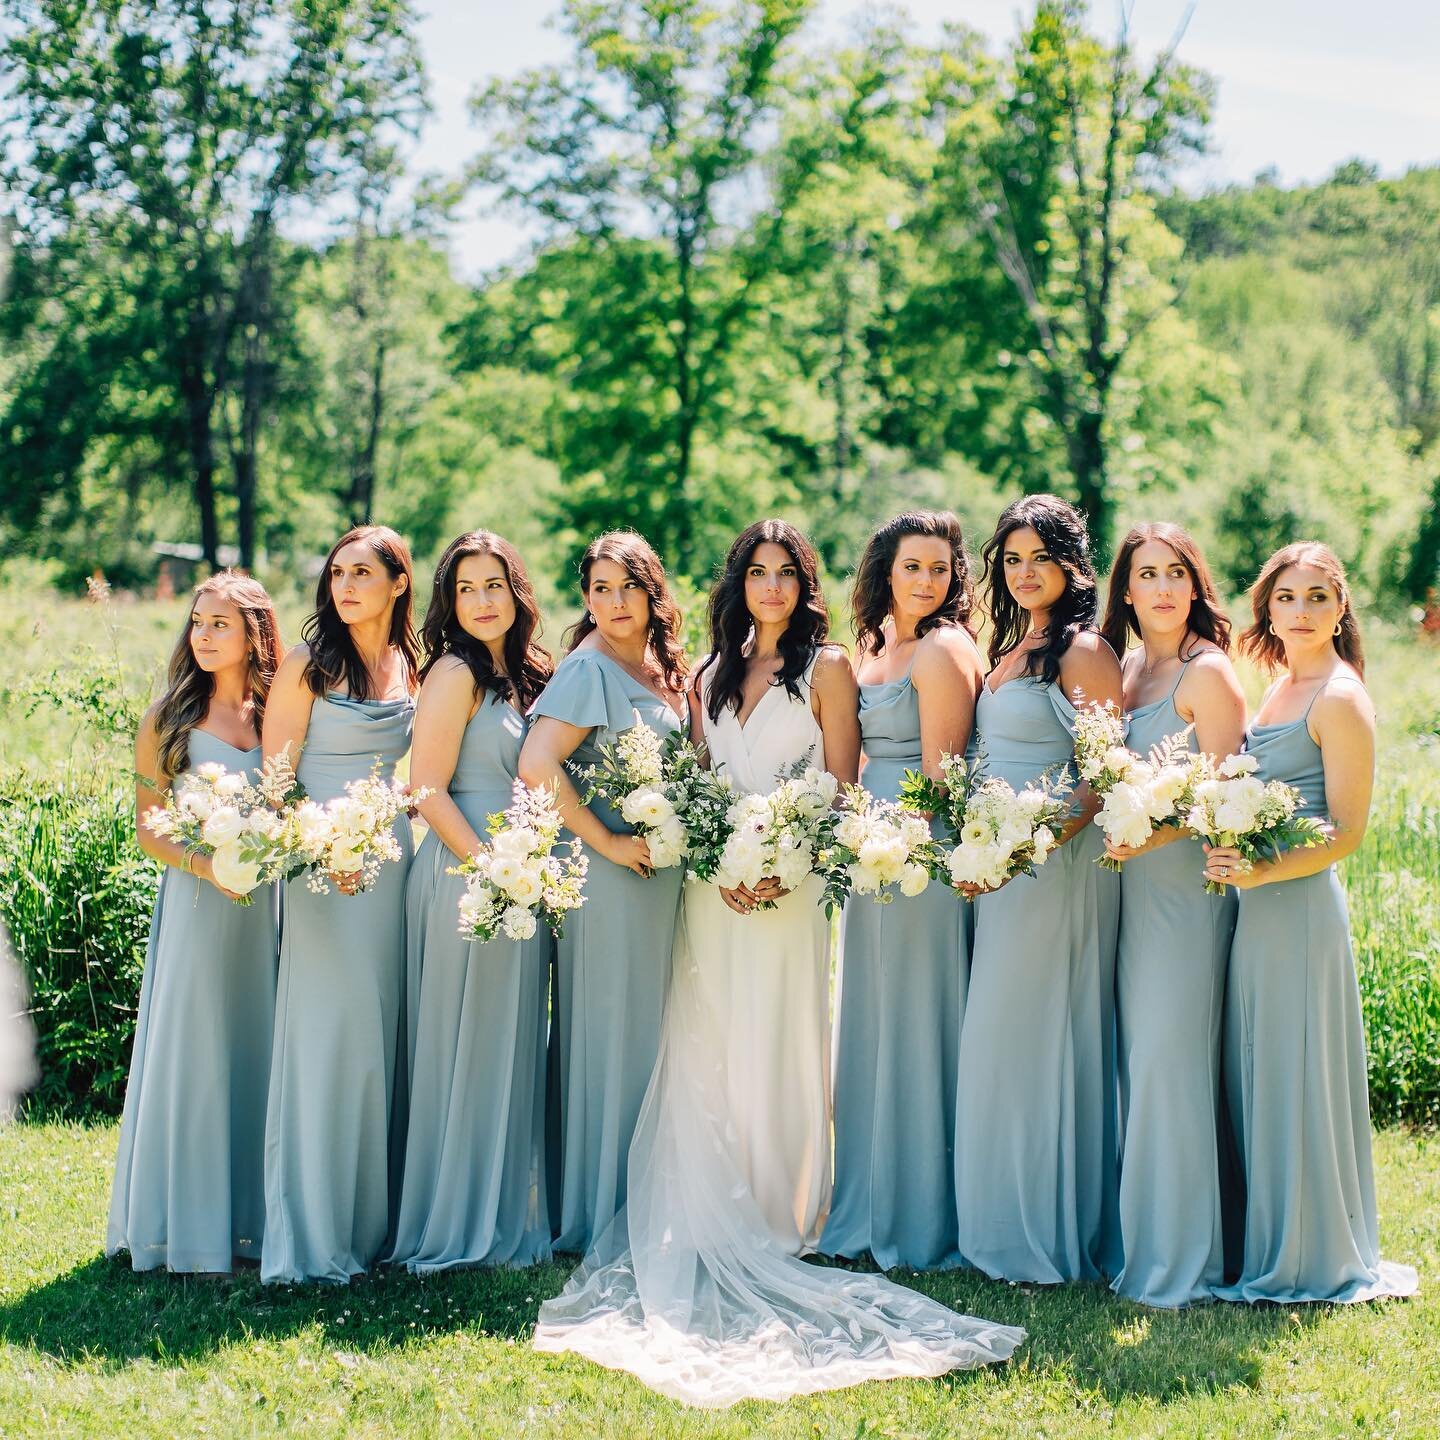 Dream girls from a dream wedding this weekend! Just got a few sneaks from @nidyalloydphotography and I&rsquo;m just loving the airiness and our organic whites/greens bouquets against these dresses! What stunning ladies and don&rsquo;t get me started 